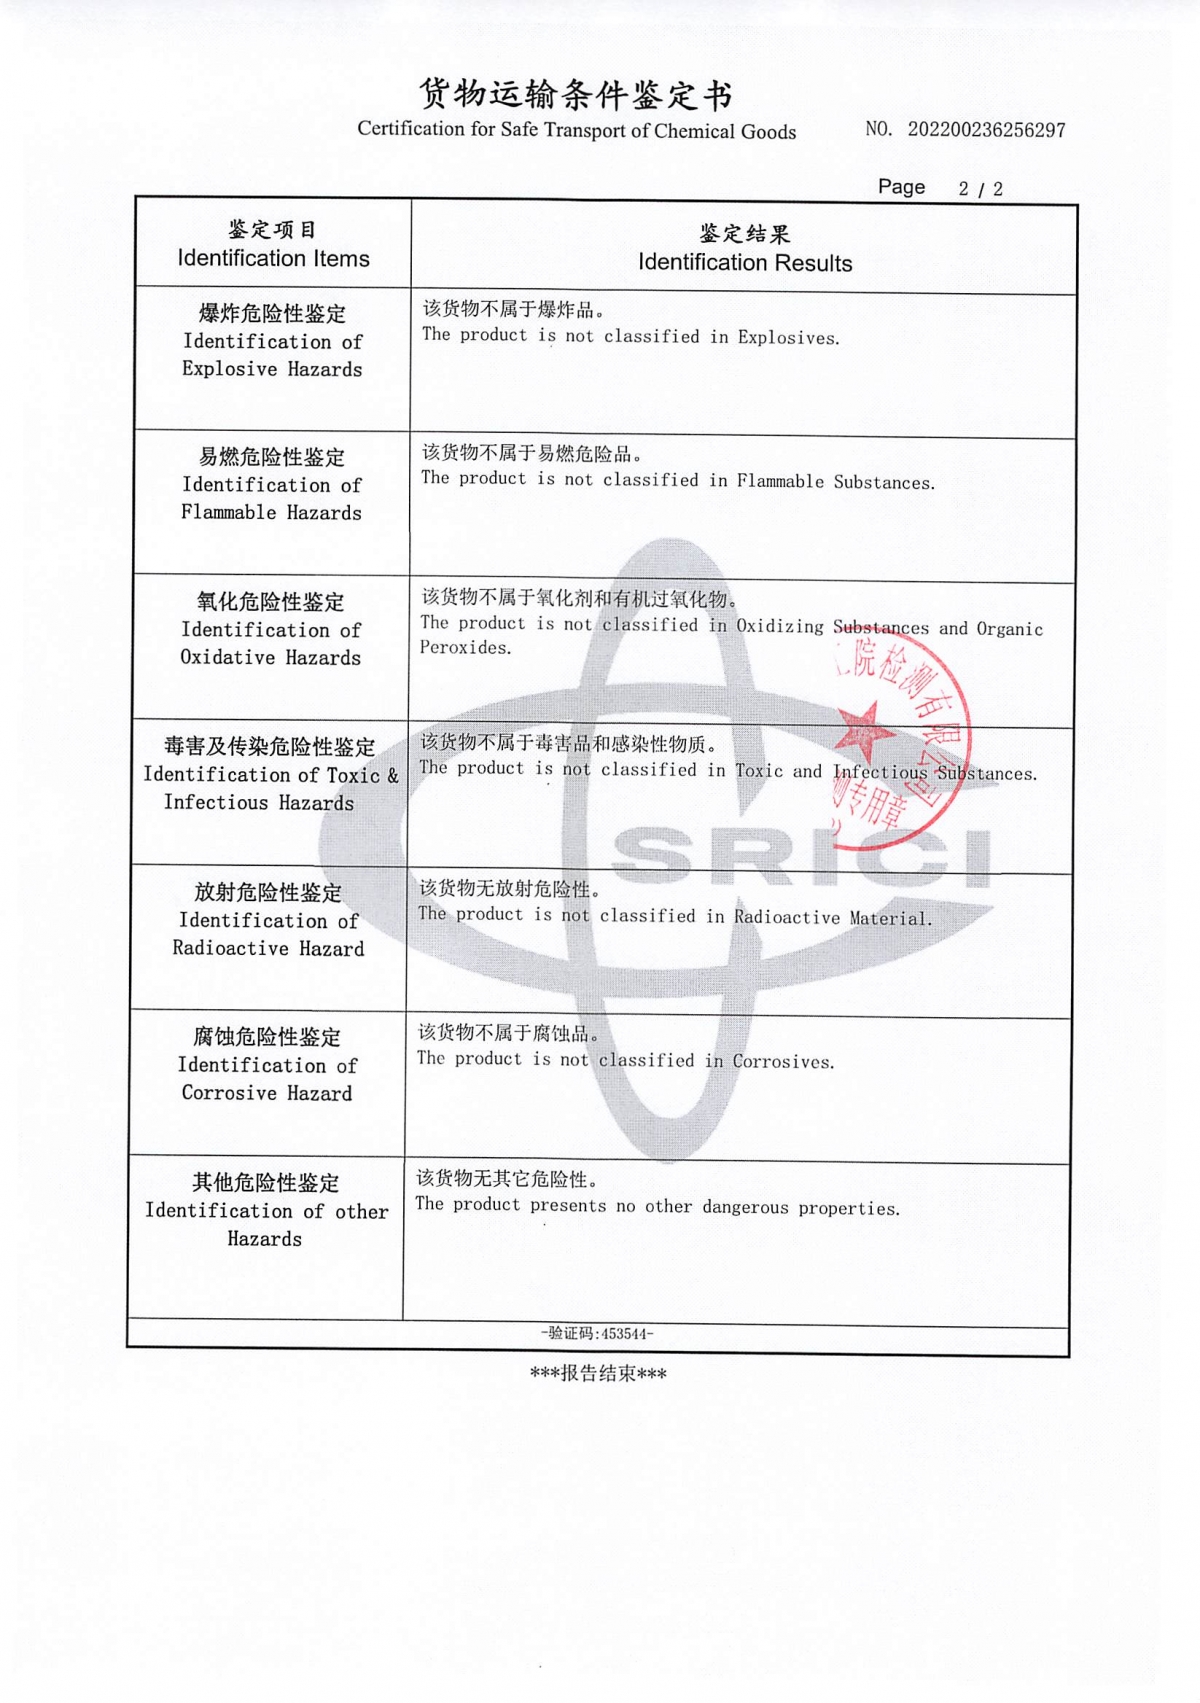 Scented Candles ‘ Certification for Safe Transport of Chemical Goods ,China Factory ,QingDao Yuan Bridge Houseware Co Ltd-HOWCANDLE-Candles,Scented Candles,Aromatherapy Candles,Soy Candles,Vegan Candles,Jar Candles,Pillar Candles,Candle Gift Sets,Essential Oils,Reed Diffuser,Candle Holder,